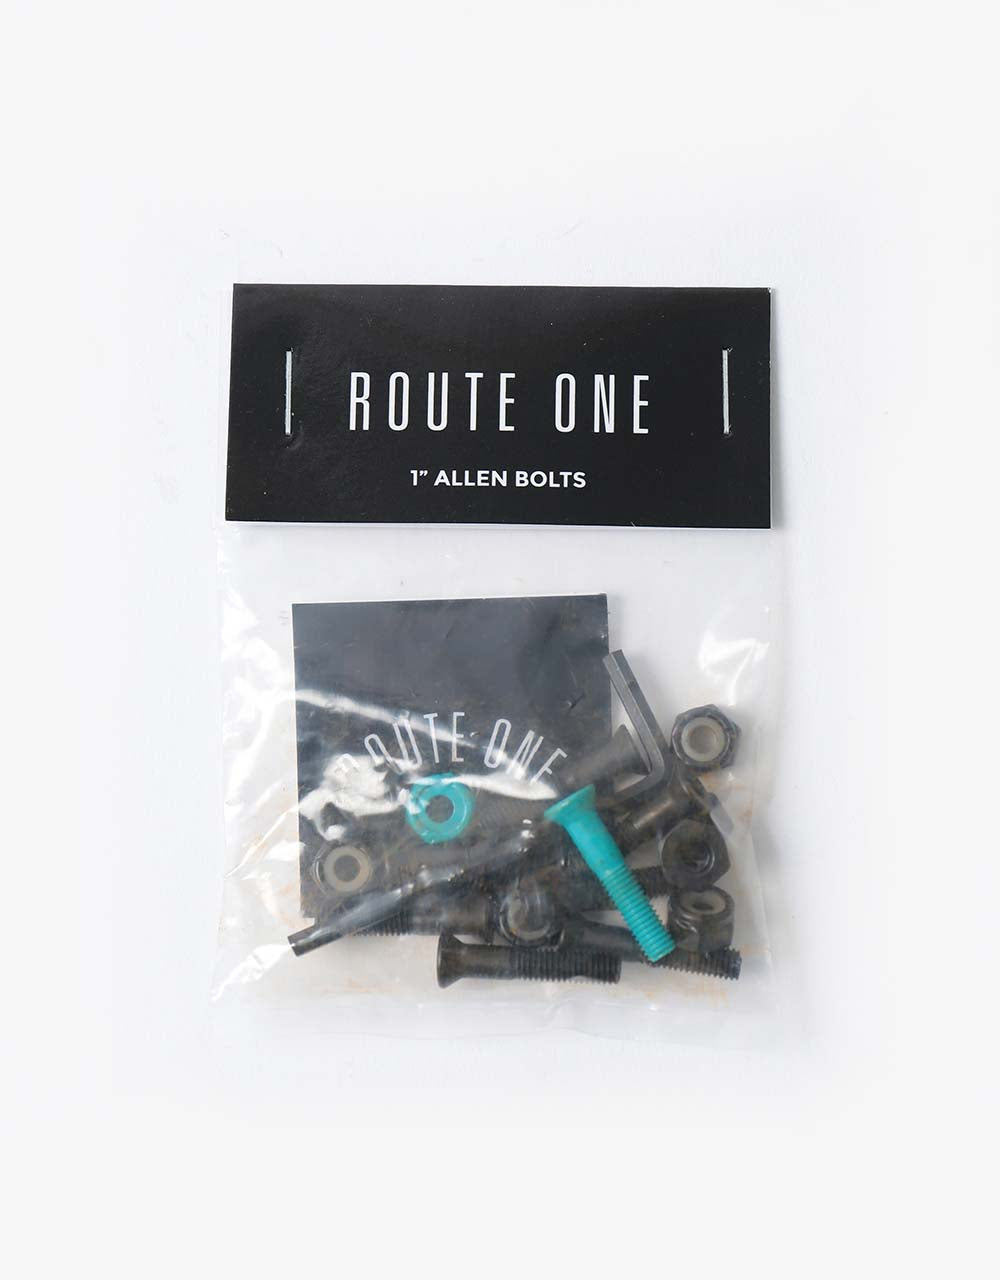 Route One 1" Allen Bolts